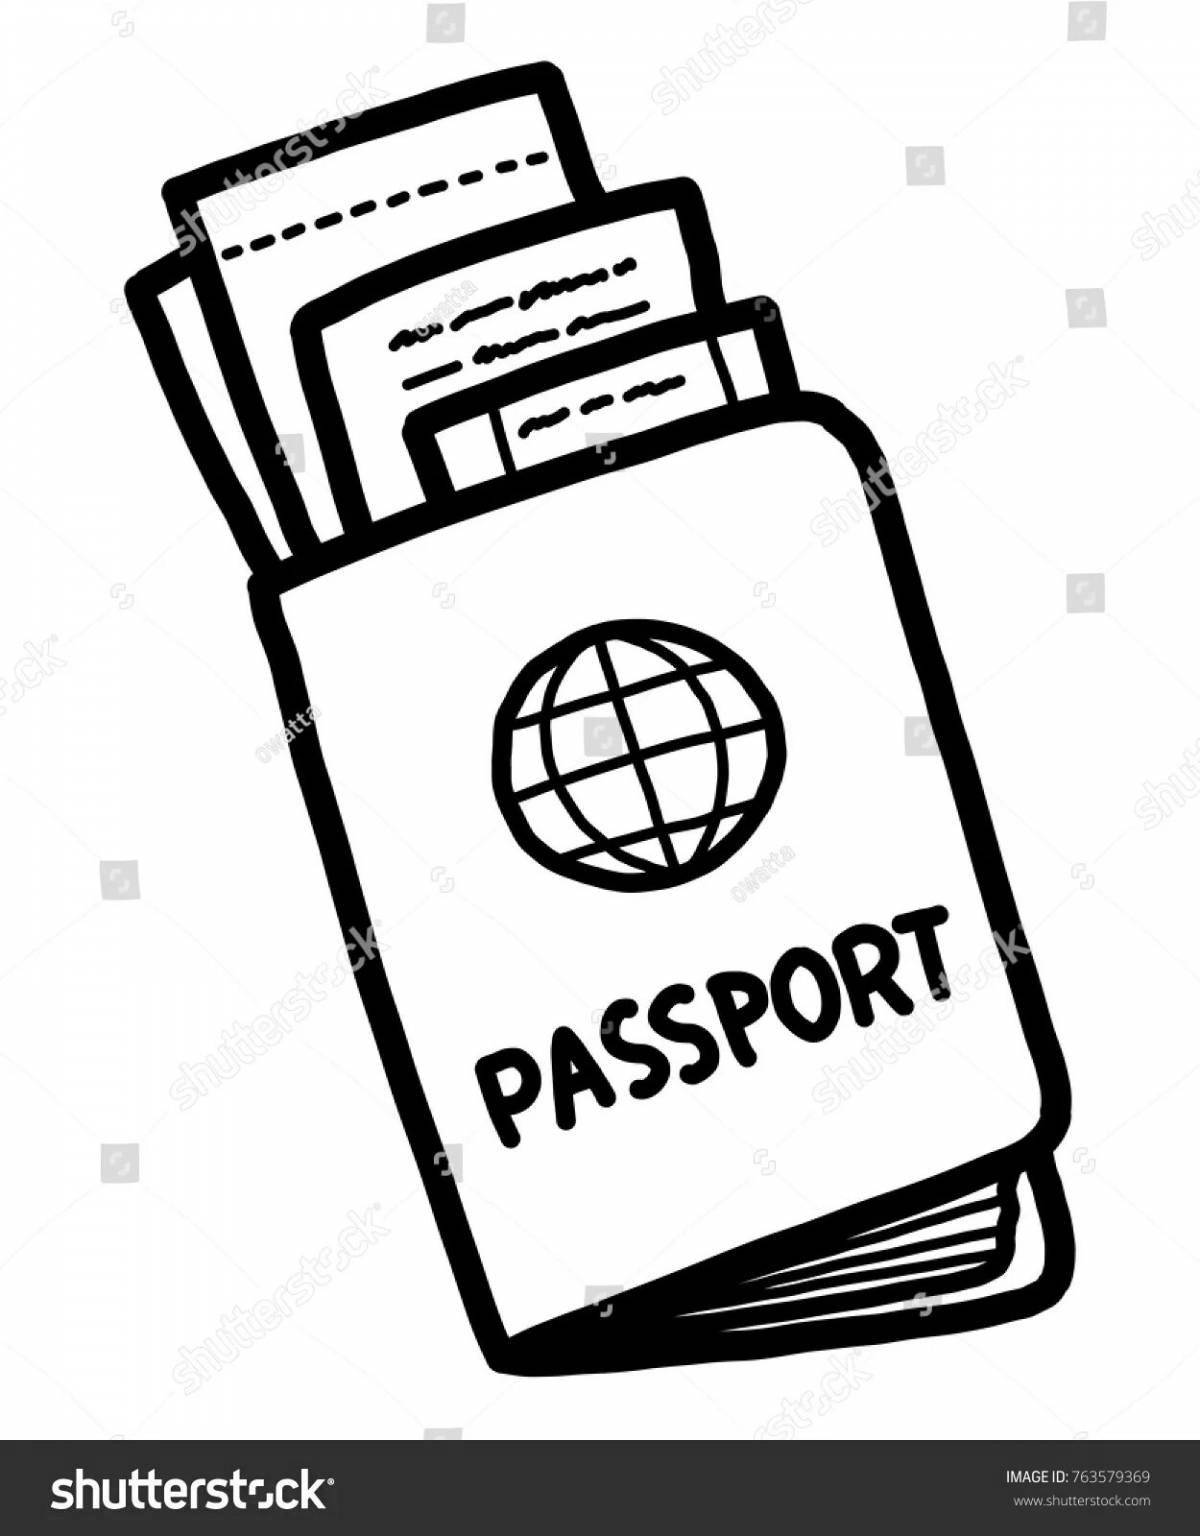 Attractive passport coloring for youth